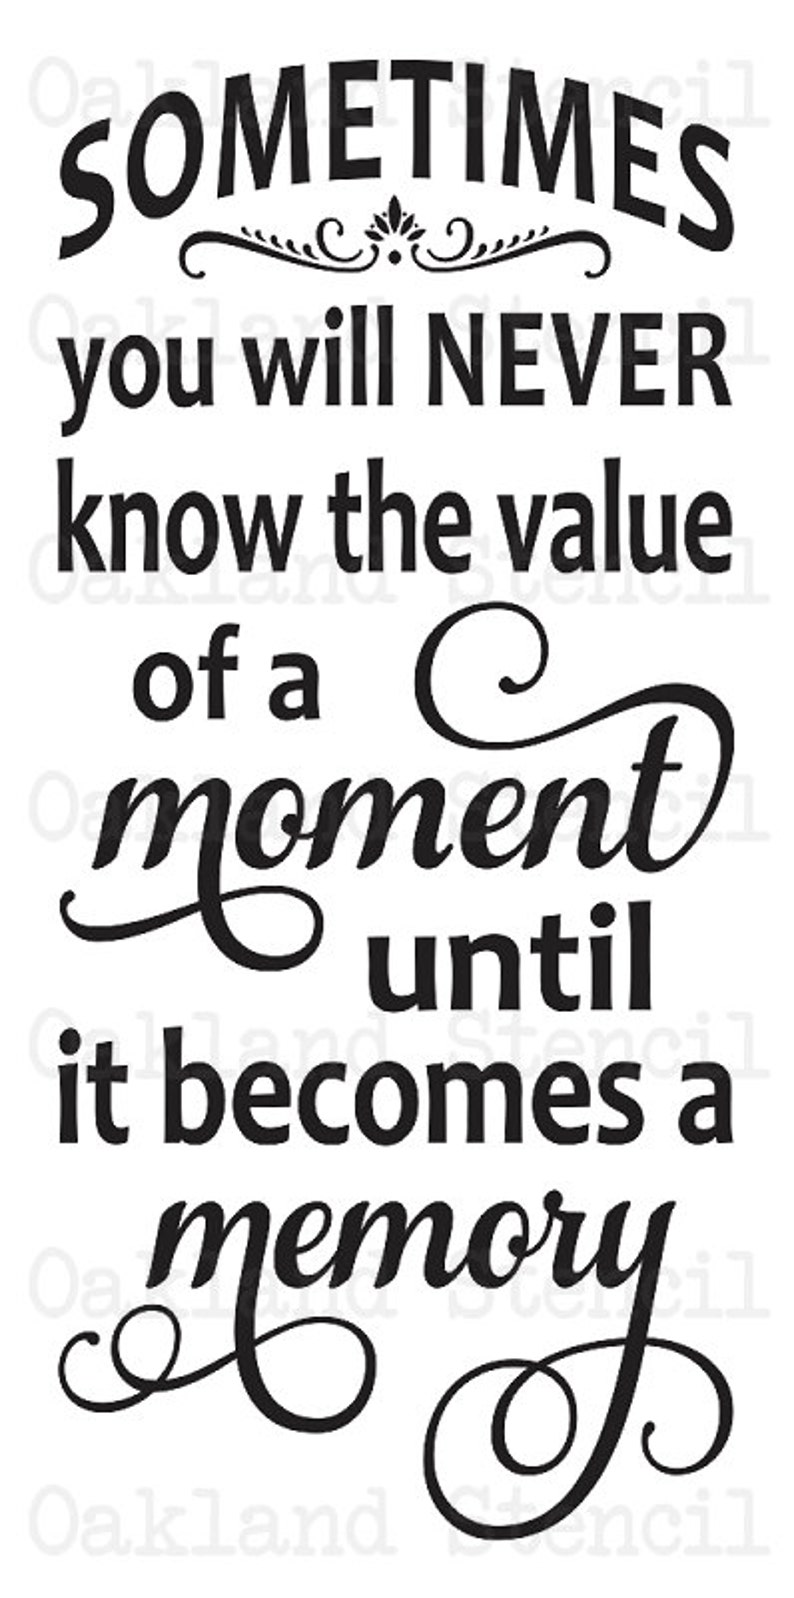 Inspirational STENCIL Sometimes you will never know the value of a moment12x24 for Painting Signs, Fabric, Walls, Airbrush, Crafts image 1